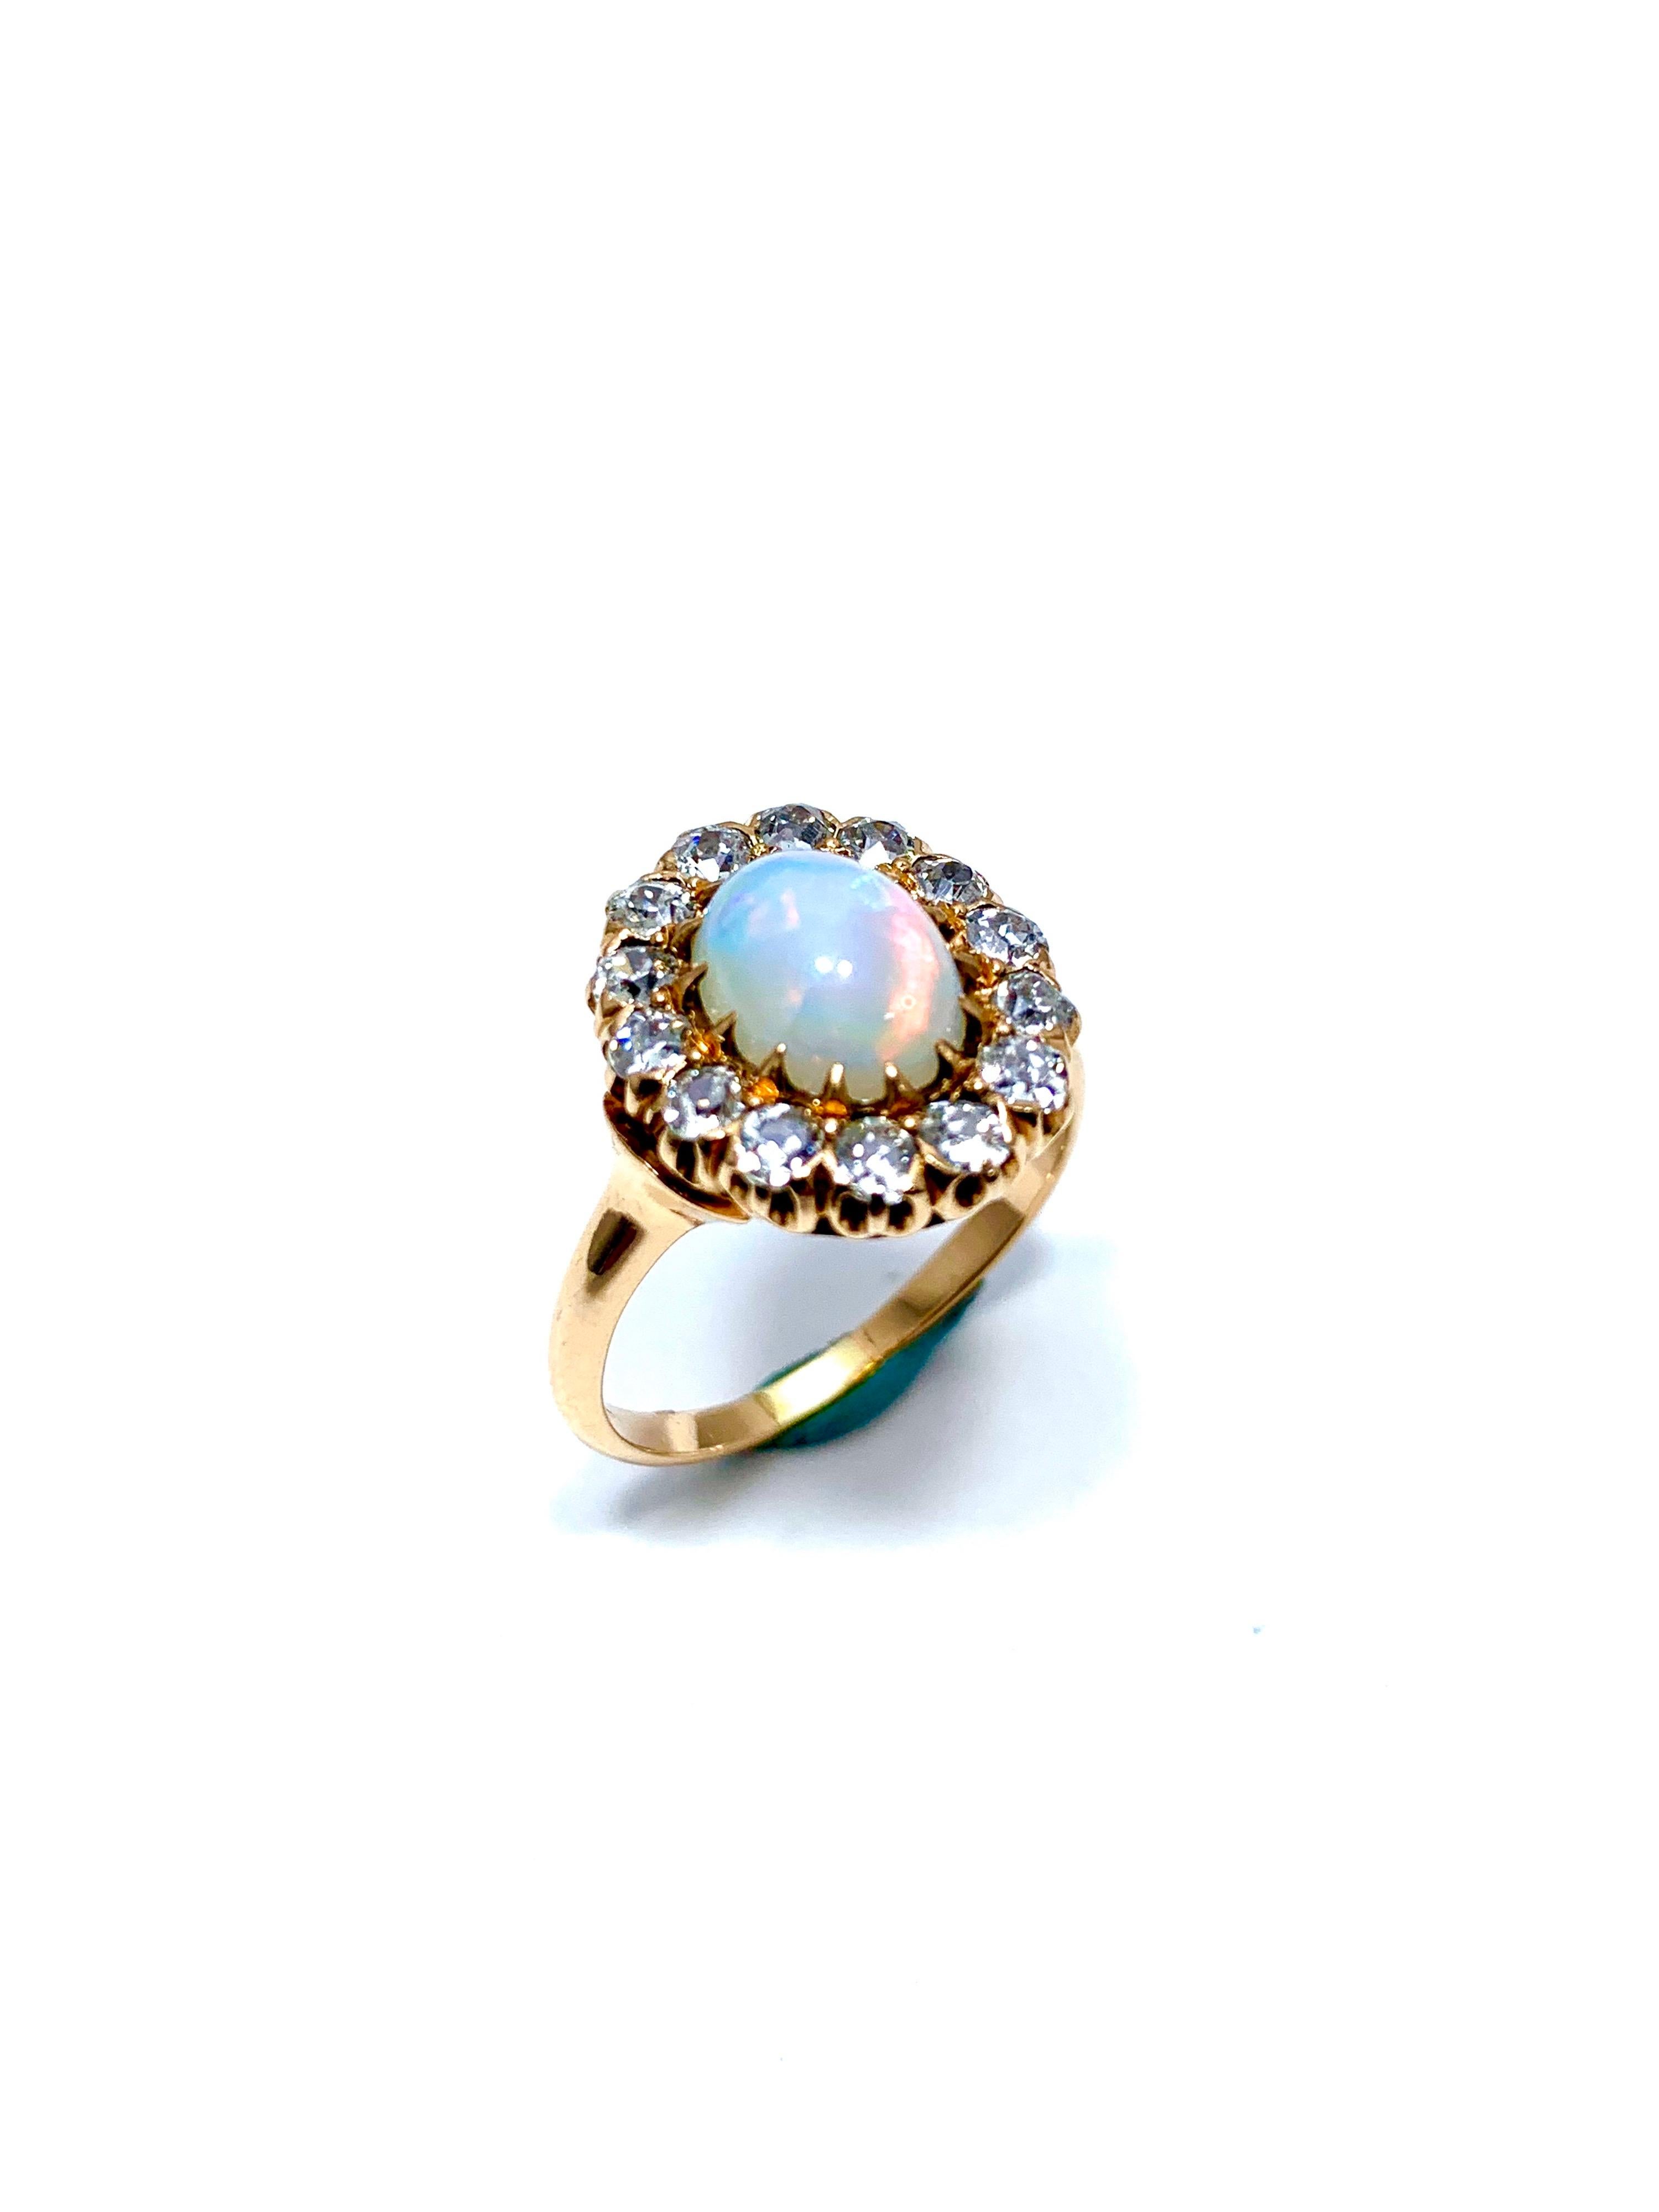 Women's or Men's Art Deco Style Cabochon White Opal and Old European Cut Diamond Ring